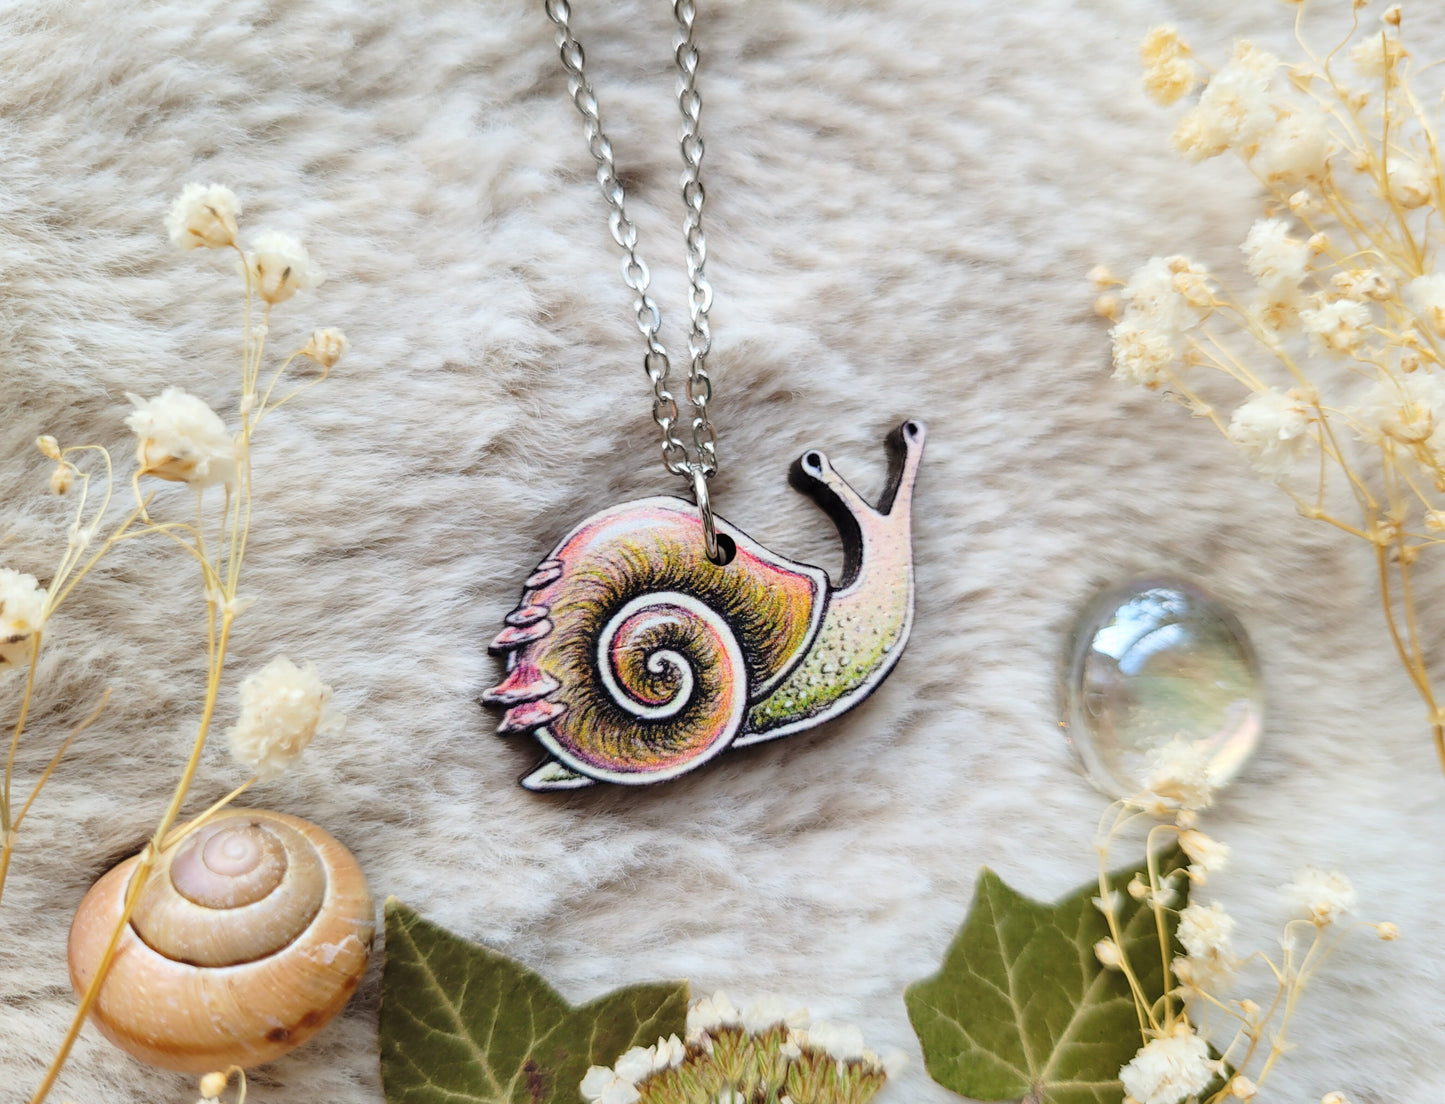 Cute Snail Illustrated necklace, responsibly sourced cherry wood, chain options available, by Grace Moth